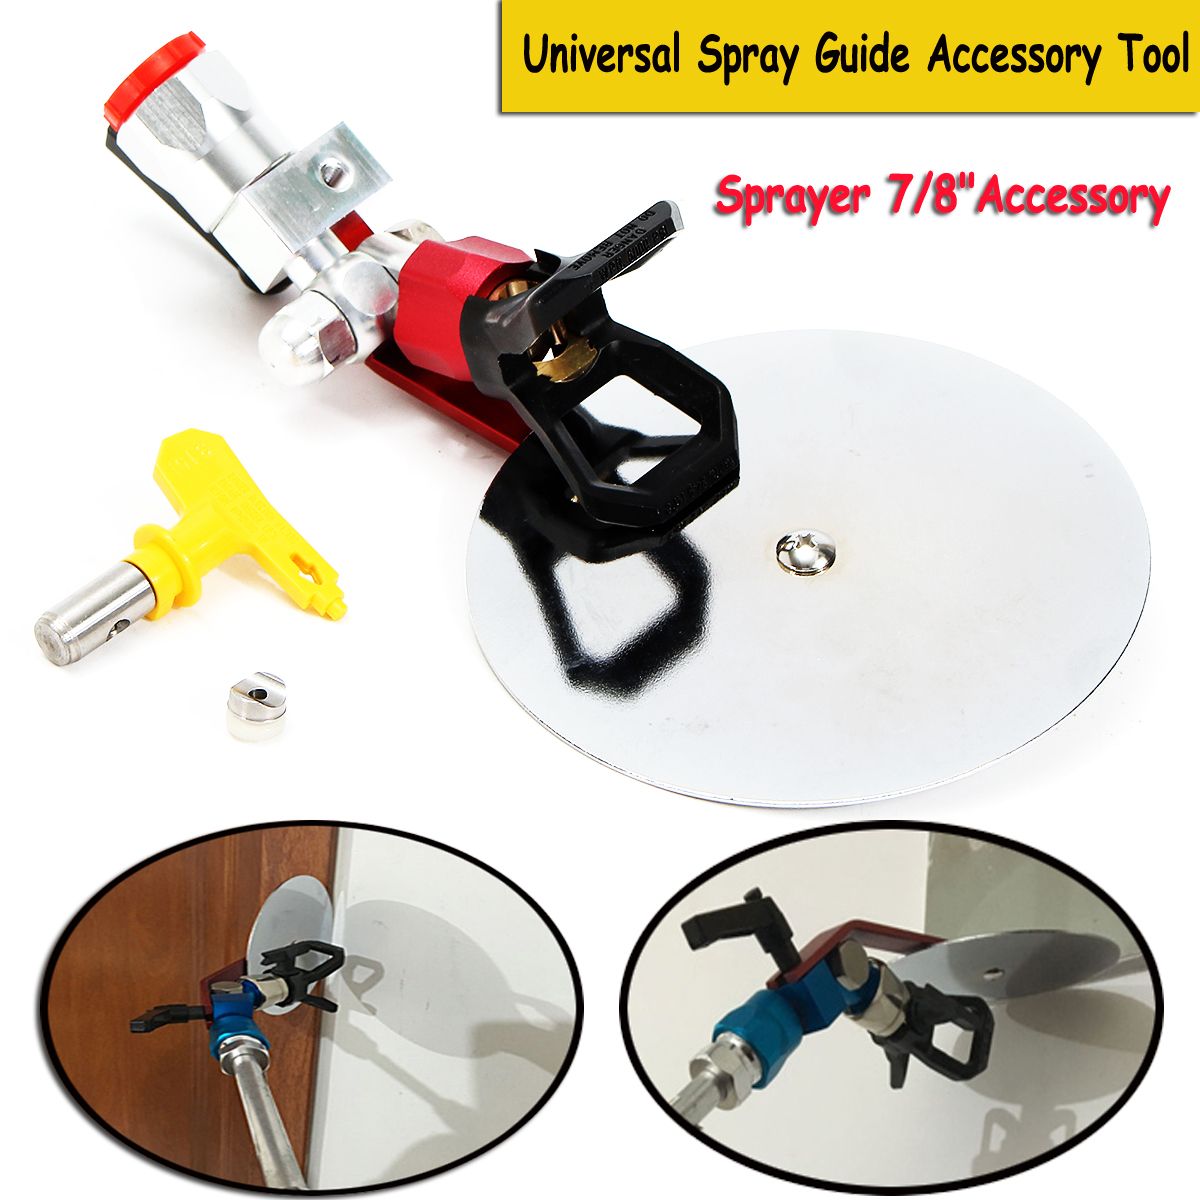 Universal-Spray-Guide-Accessory-Tool-For-Wagner-Titan-Paint-Sprayer-Nozzle-78-Inch-1192392